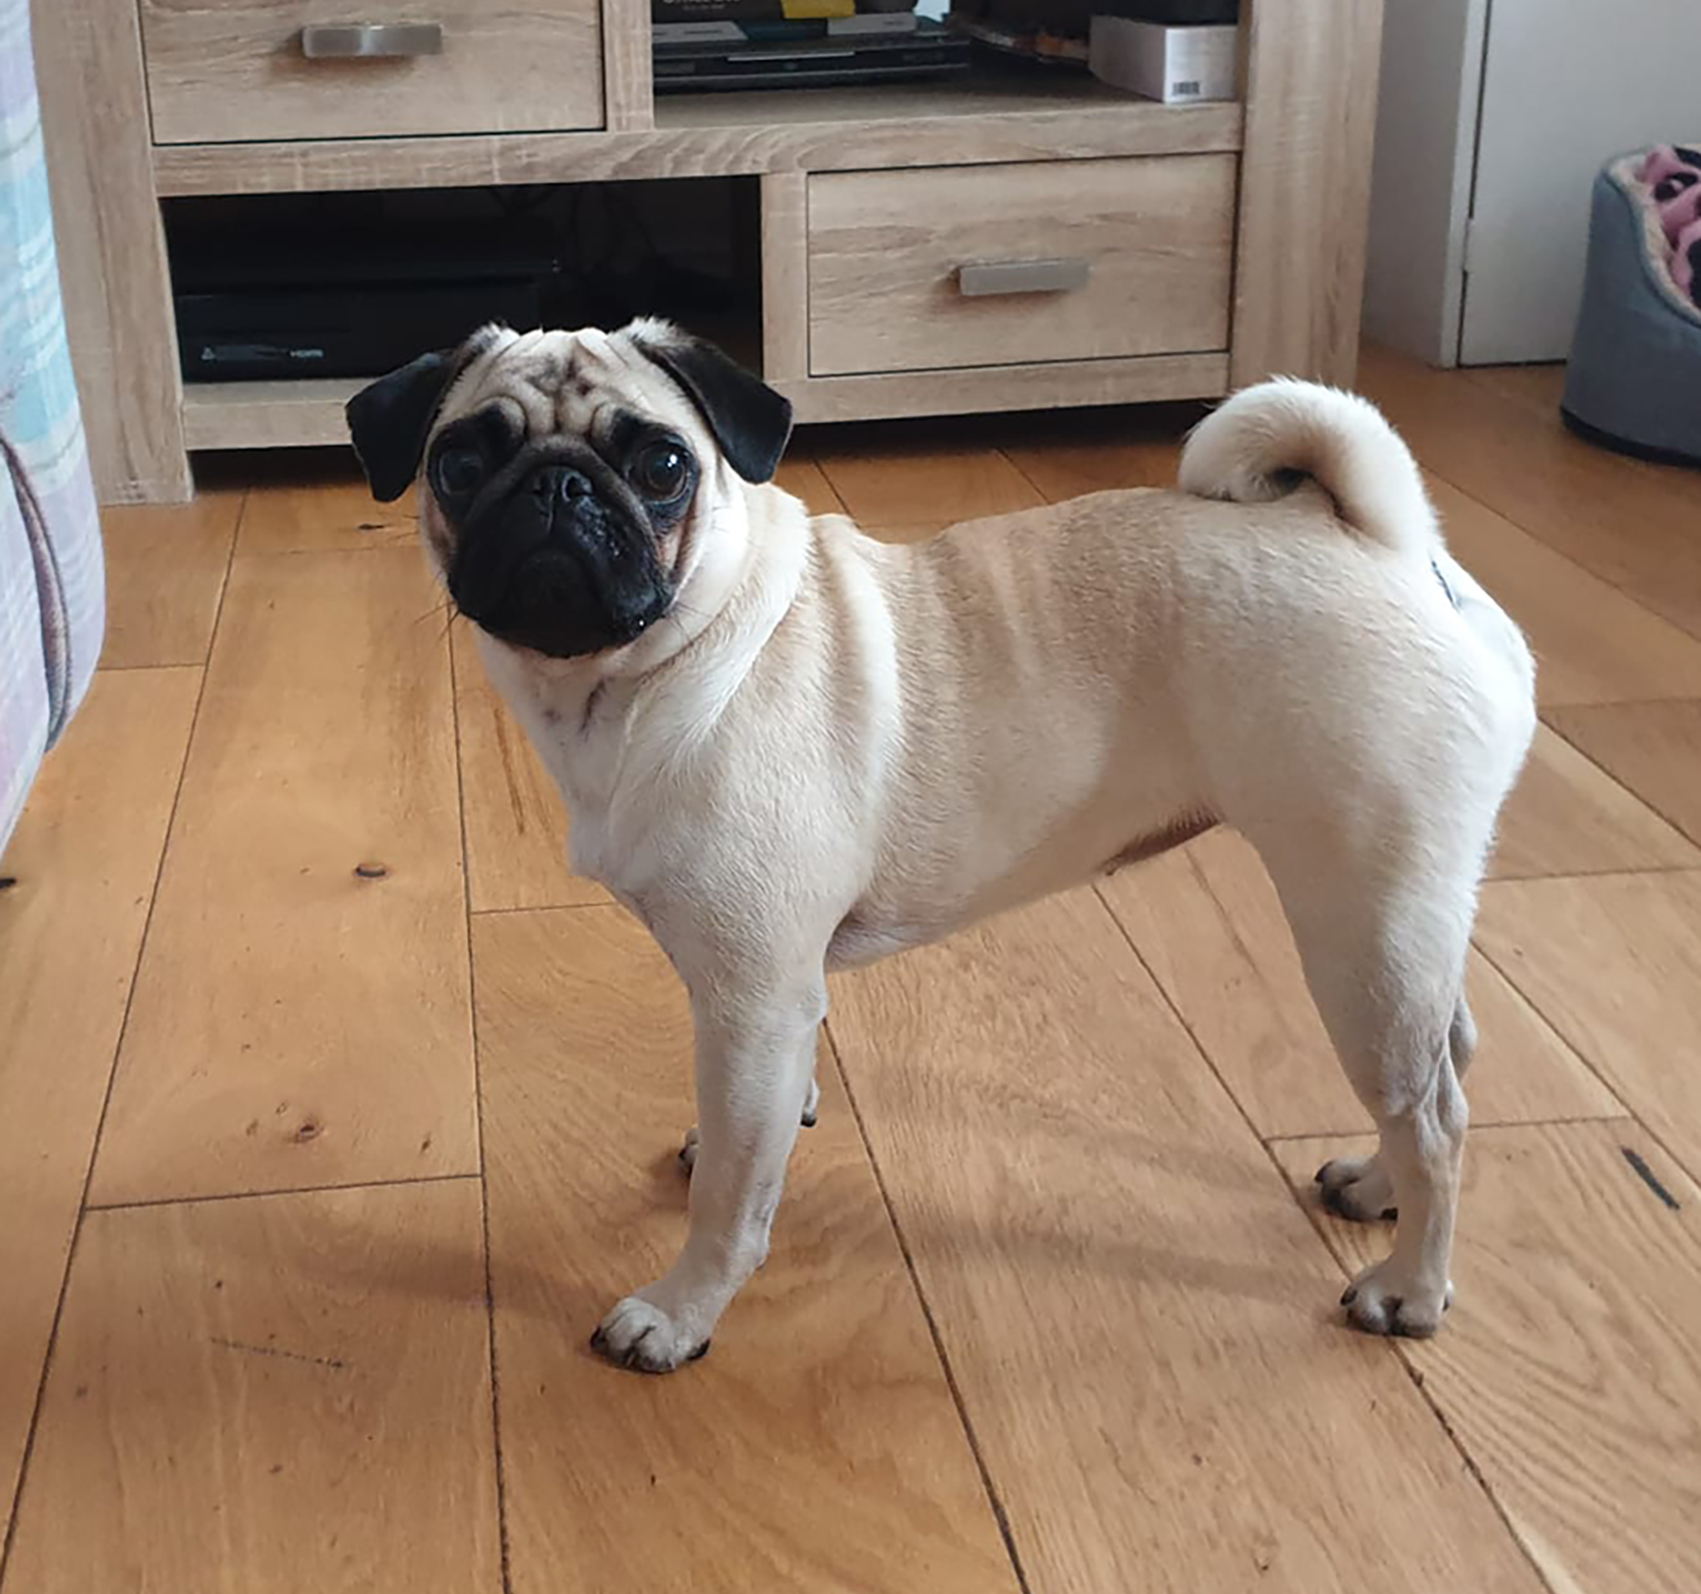 Adoption for Bobby the pug - image Susie on https://pugprotectiontrust.org